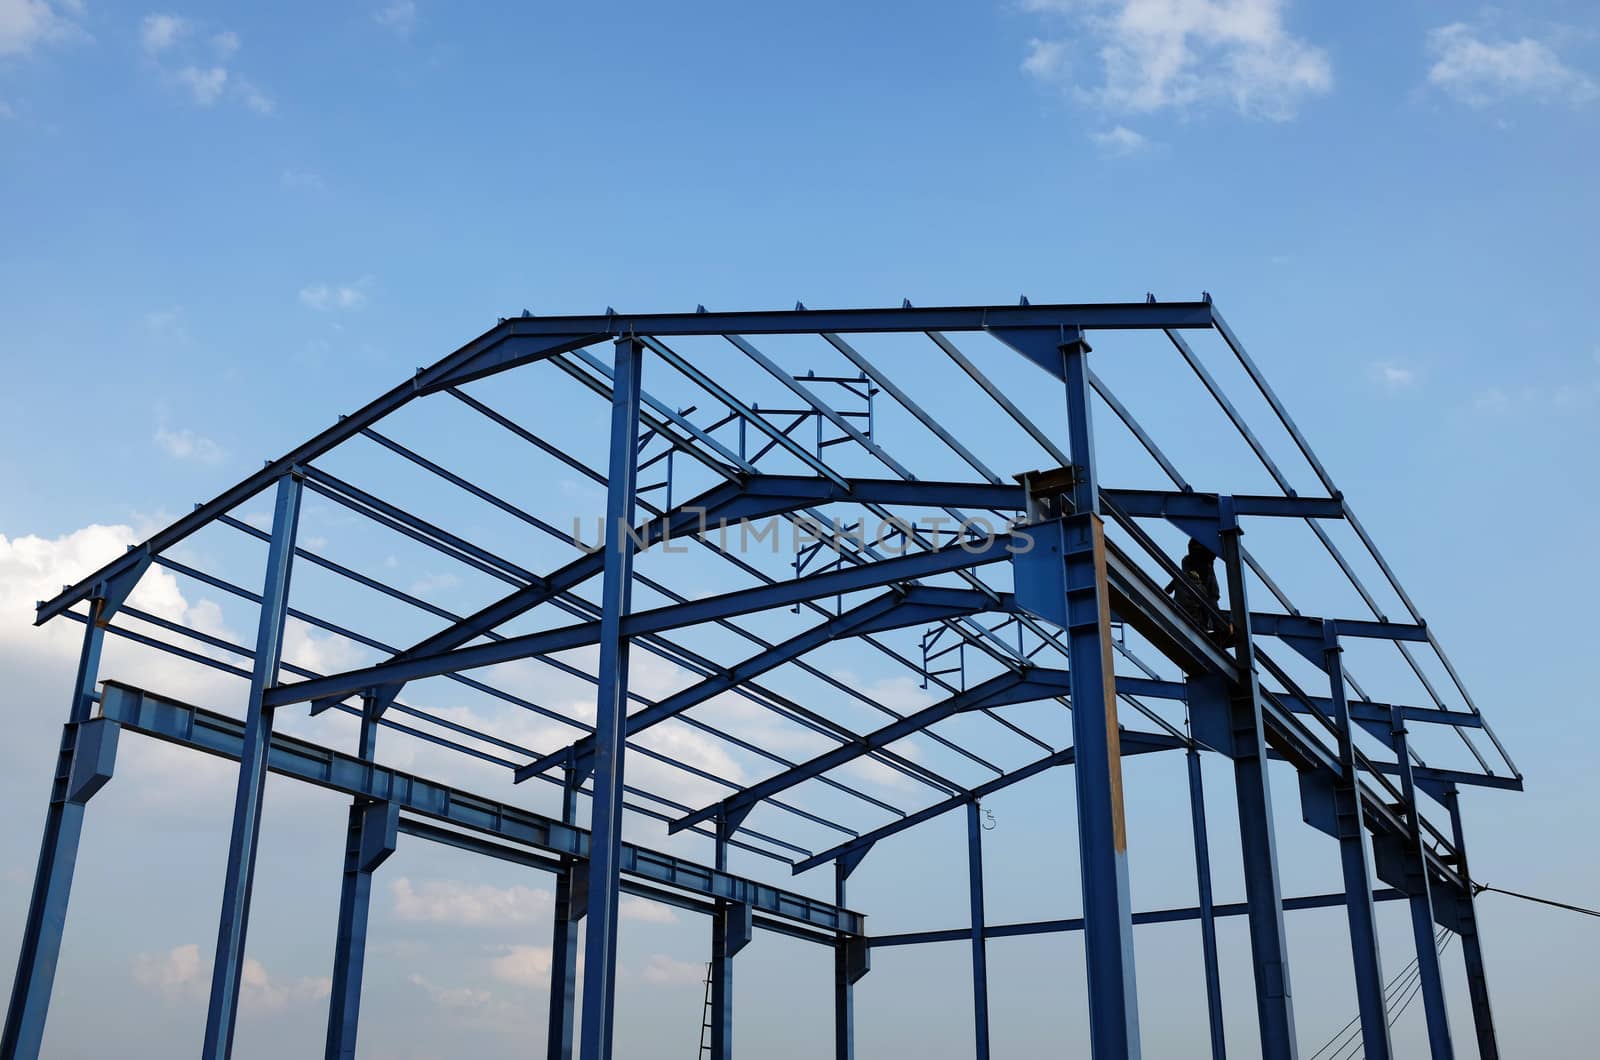 Steel structure of a new industrial building